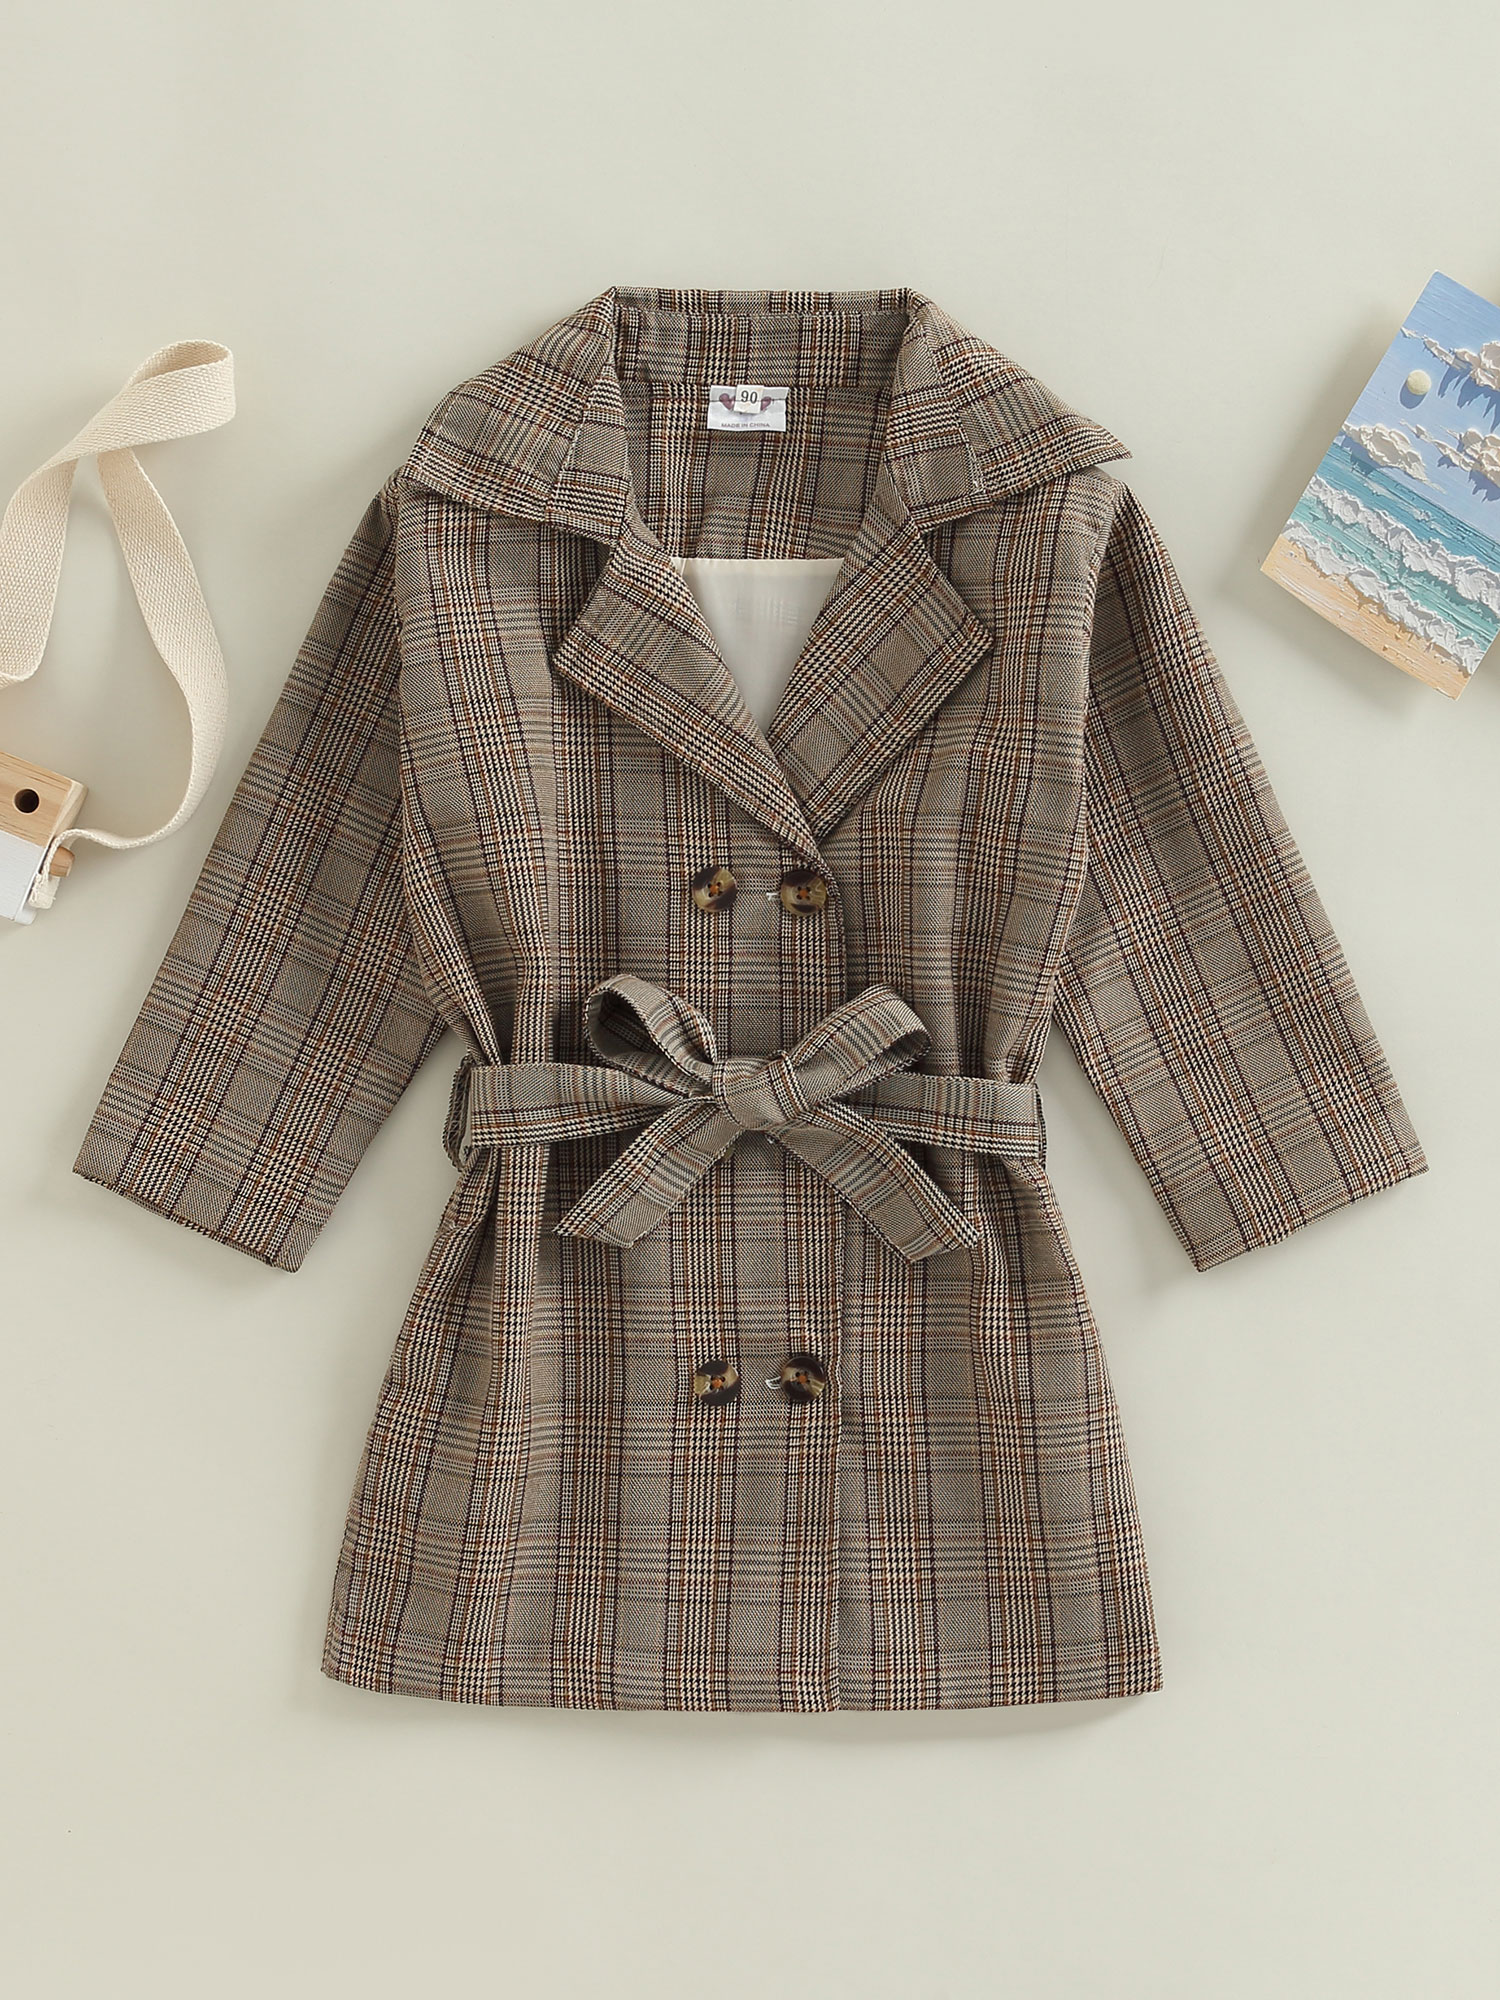 JYYYBF Toddler Baby Girl Trench Coat Long Sleeve Plaid Print Double-Breasted Belted Jacket Lapel Windbreaker Outerwear Grey 4-5 Years - image 3 of 7